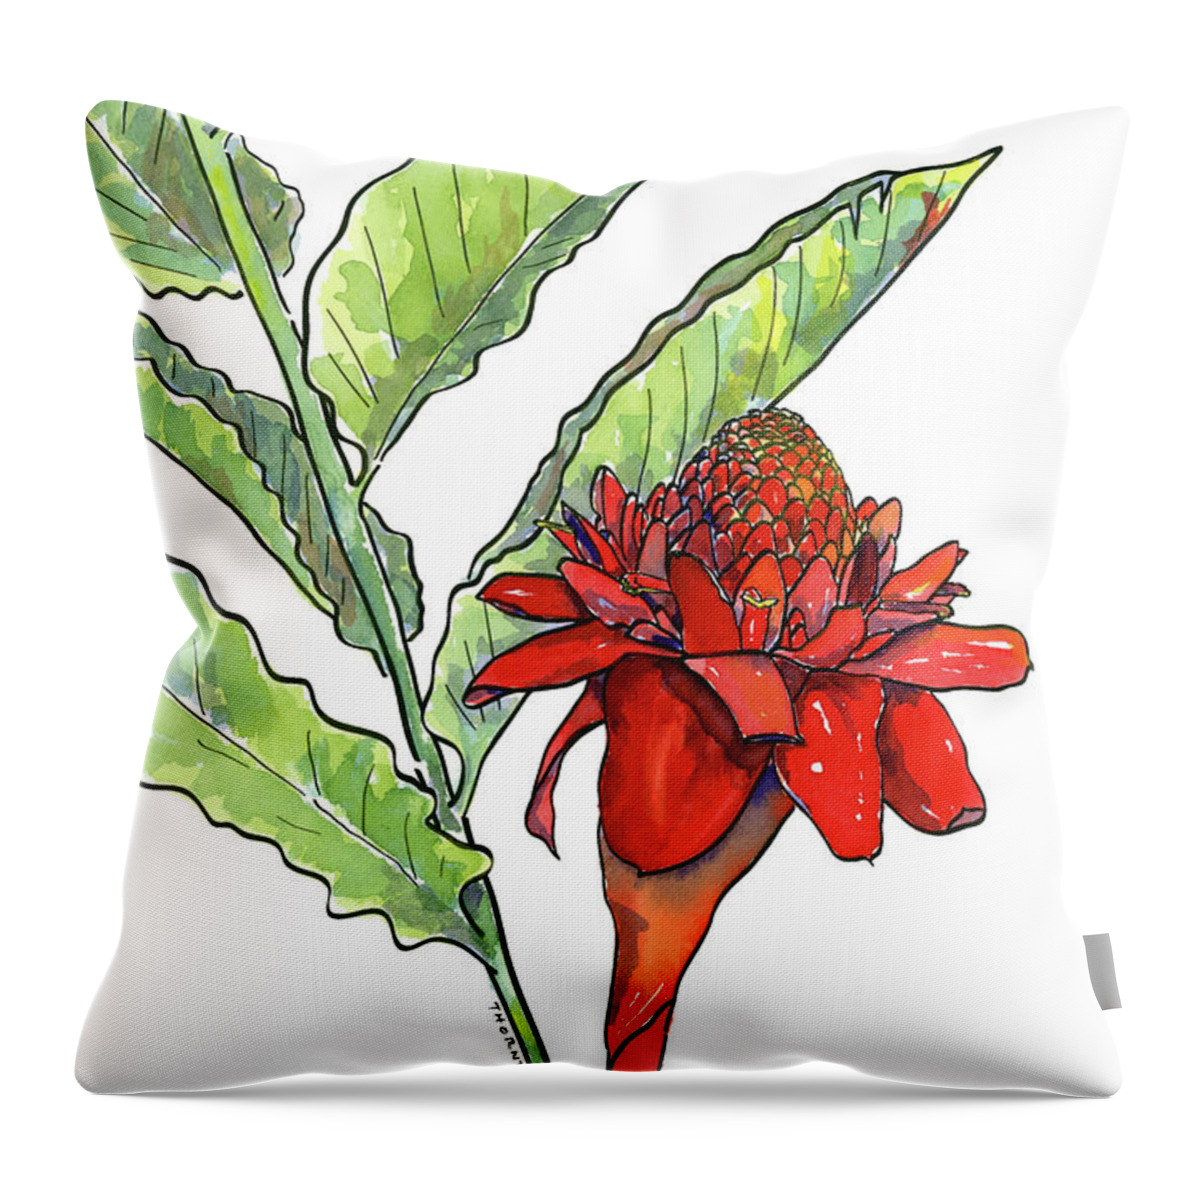 Ginger Throw Pillow featuring the painting Red Torch Ginger by Diane Thornton